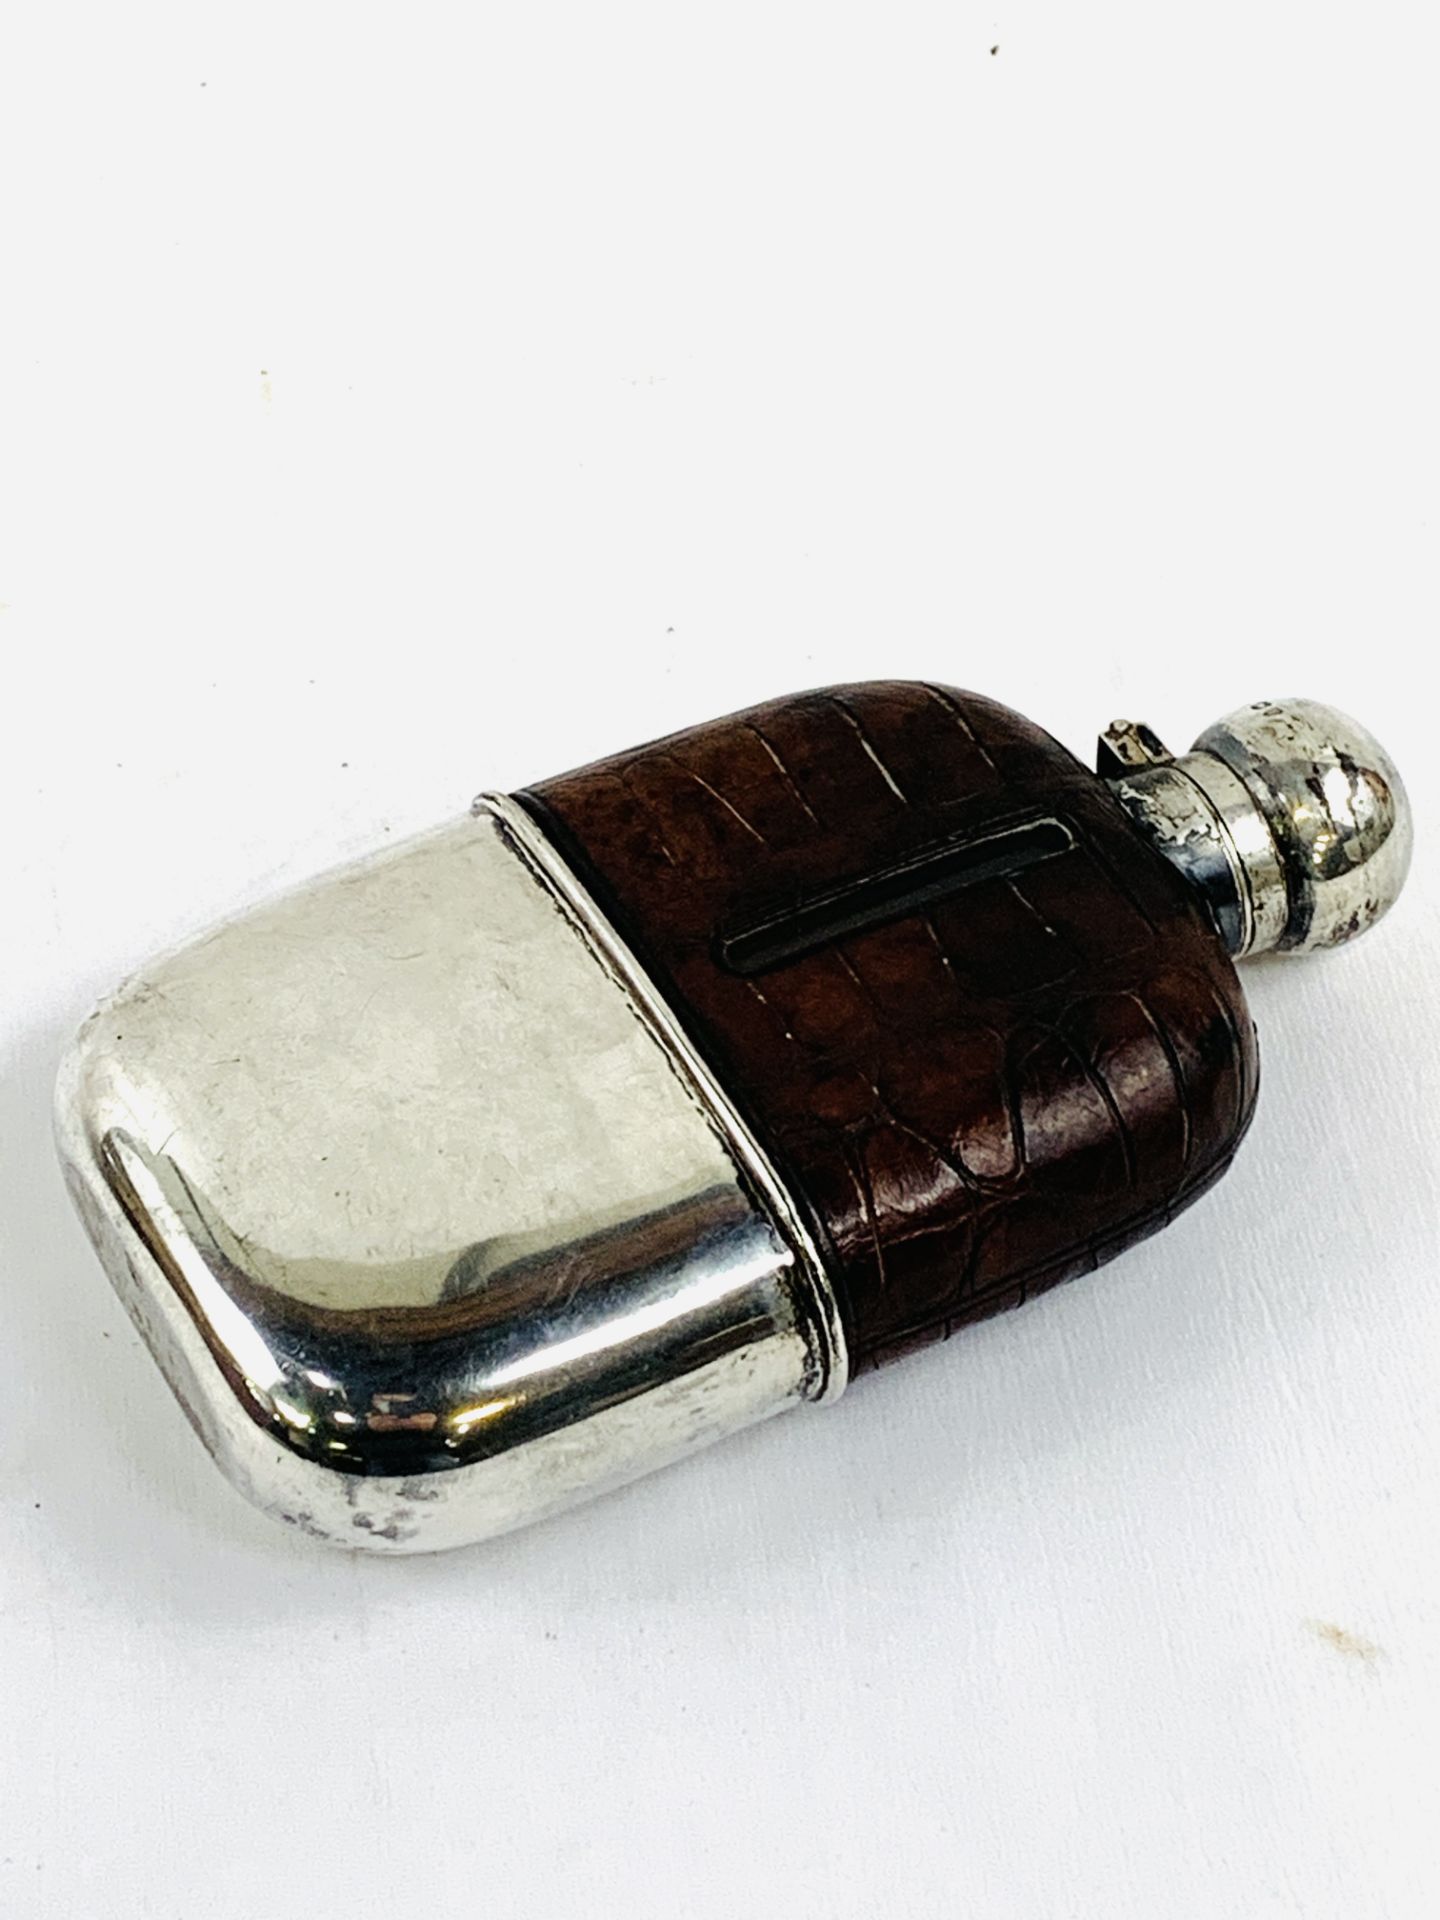 Victorian hip flask by William Hutton & Sons Ltd - Image 2 of 4